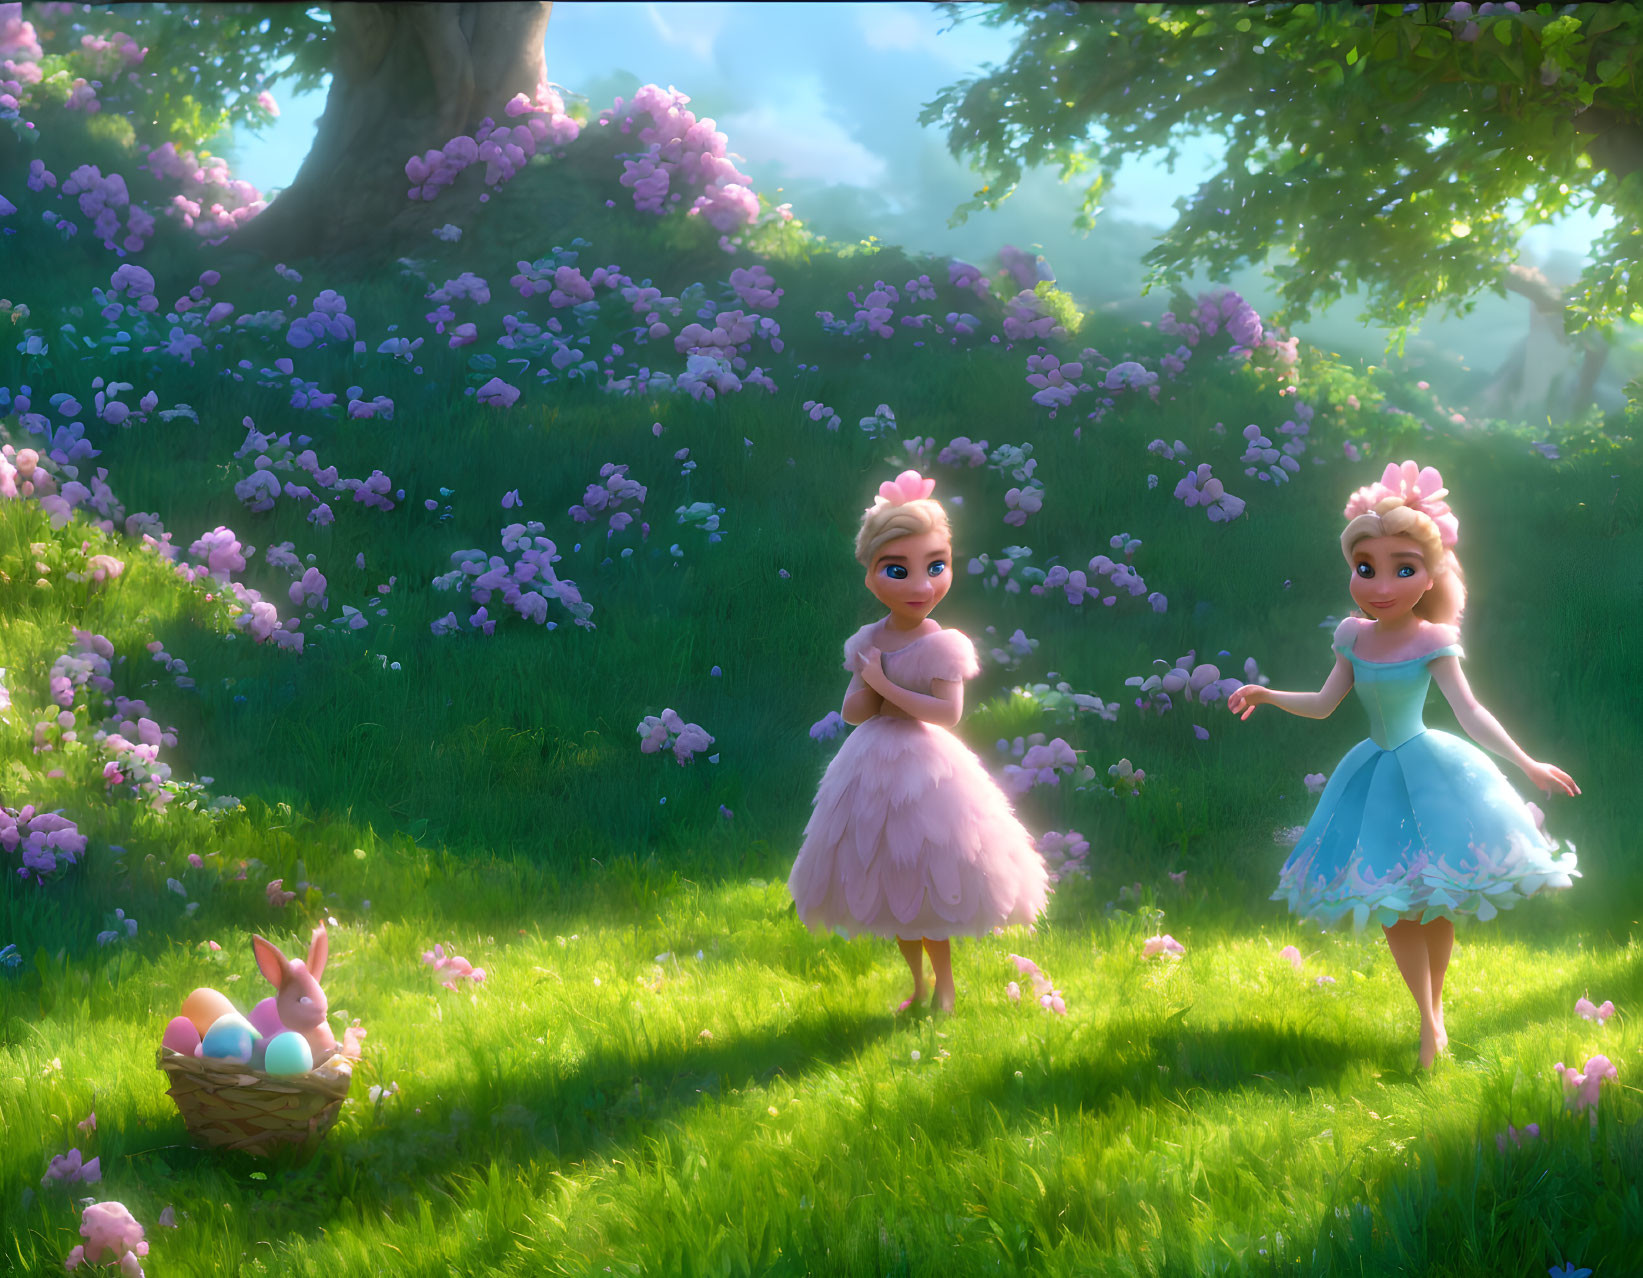 Animated princesses in sunlit meadow with purple flowers and eggs basket